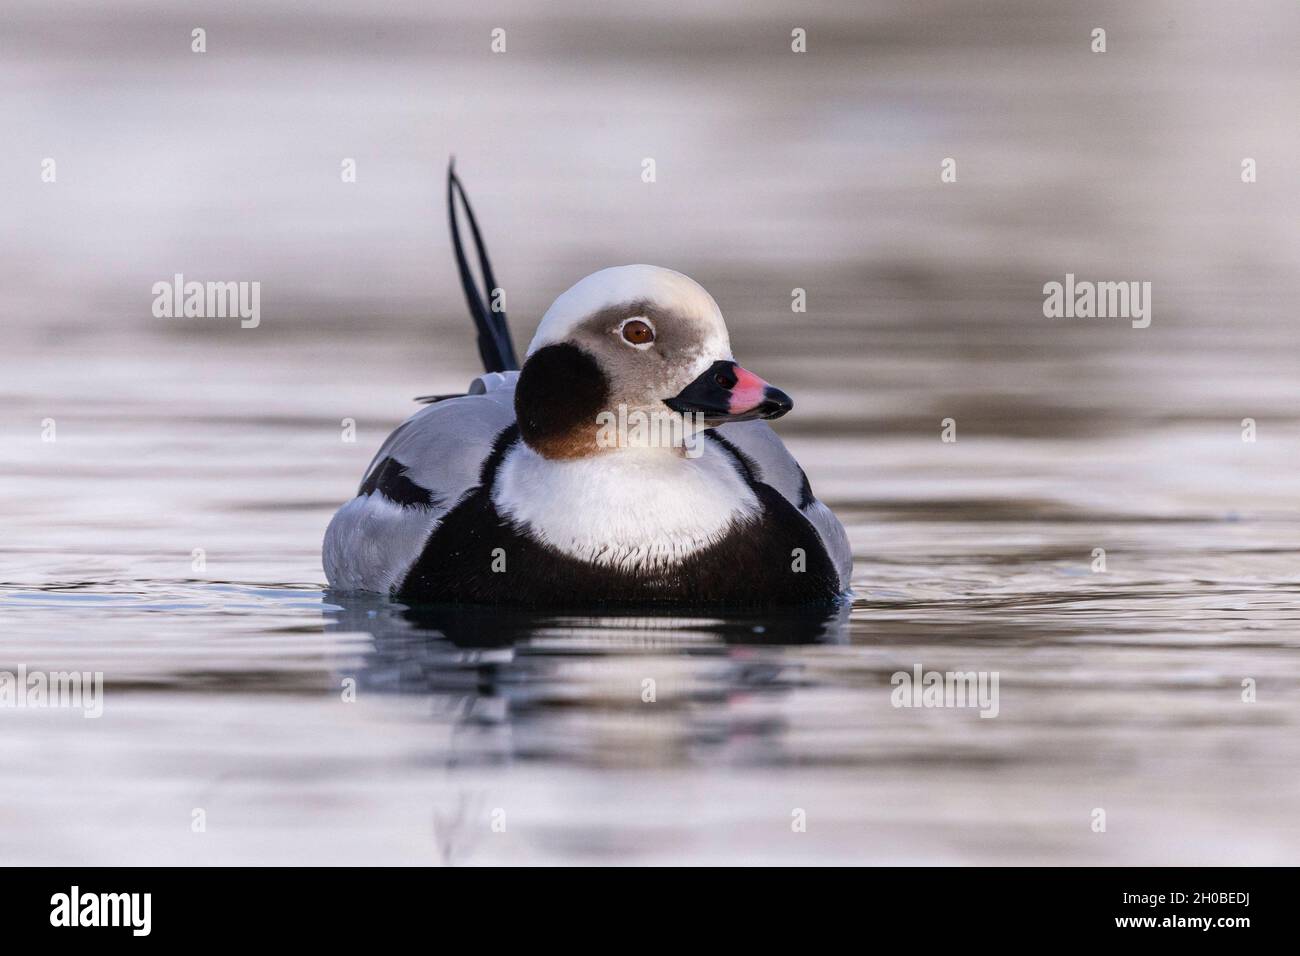 Long-tailed duck (Clangula hyemalis), commonly known in North America as Oldsquaw, male, Harbour of B atsfjord, B atsfjord, Norway, Scandinavia, Europ Stock Photo